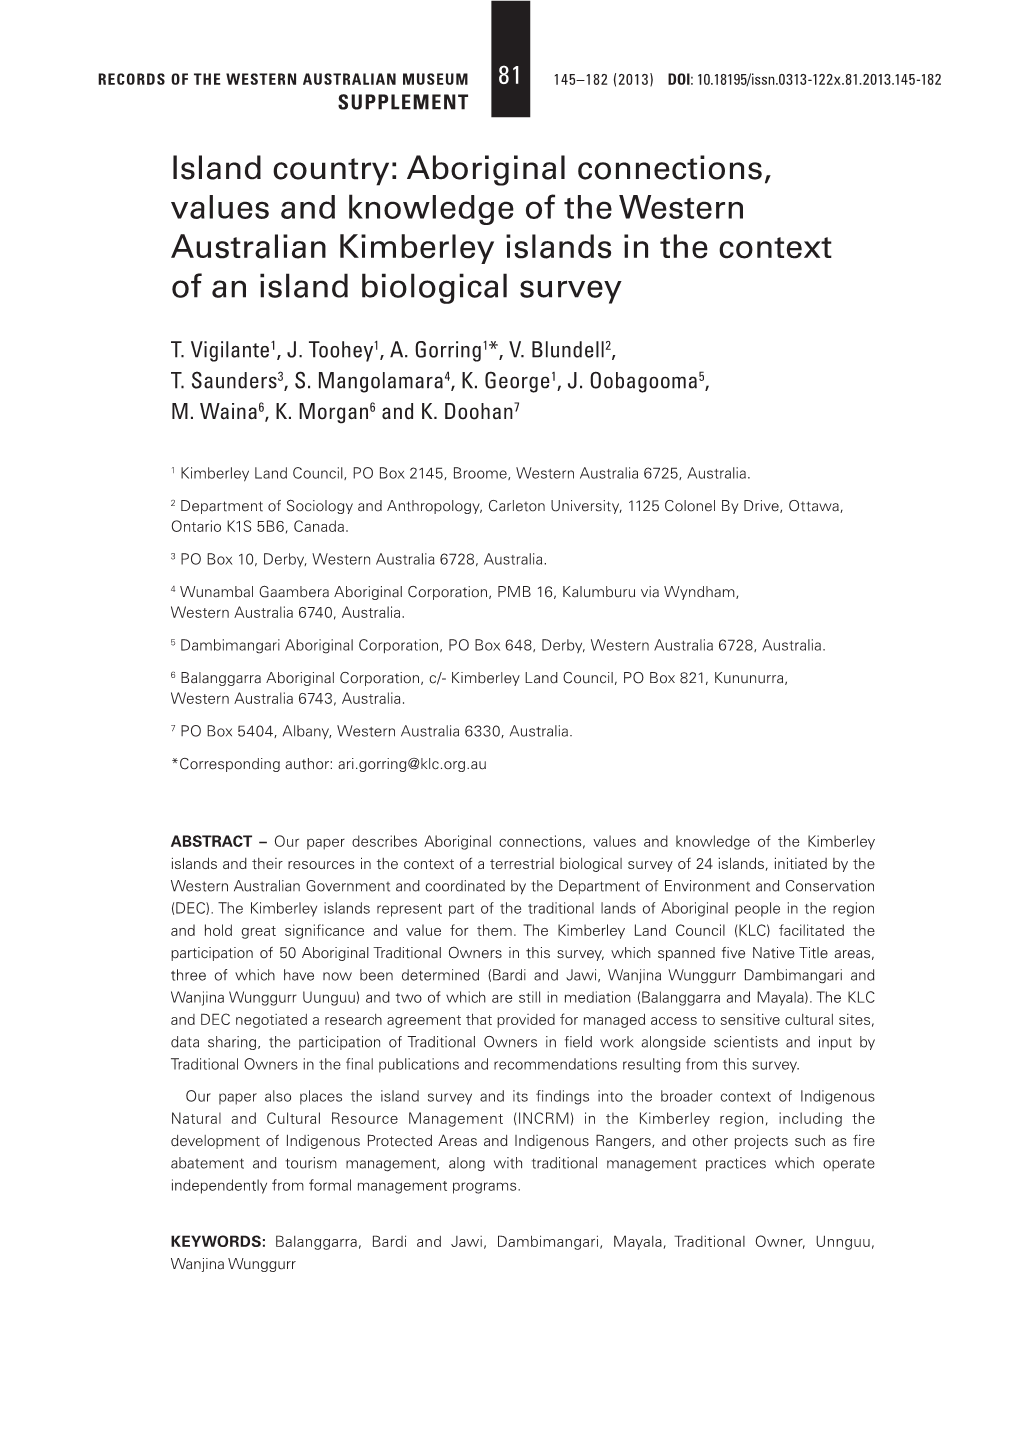 Island Country: Aboriginal Connections, Values and Knowledge of the Western Australian Kimberley Islands in the Context of an Island Biological Survey